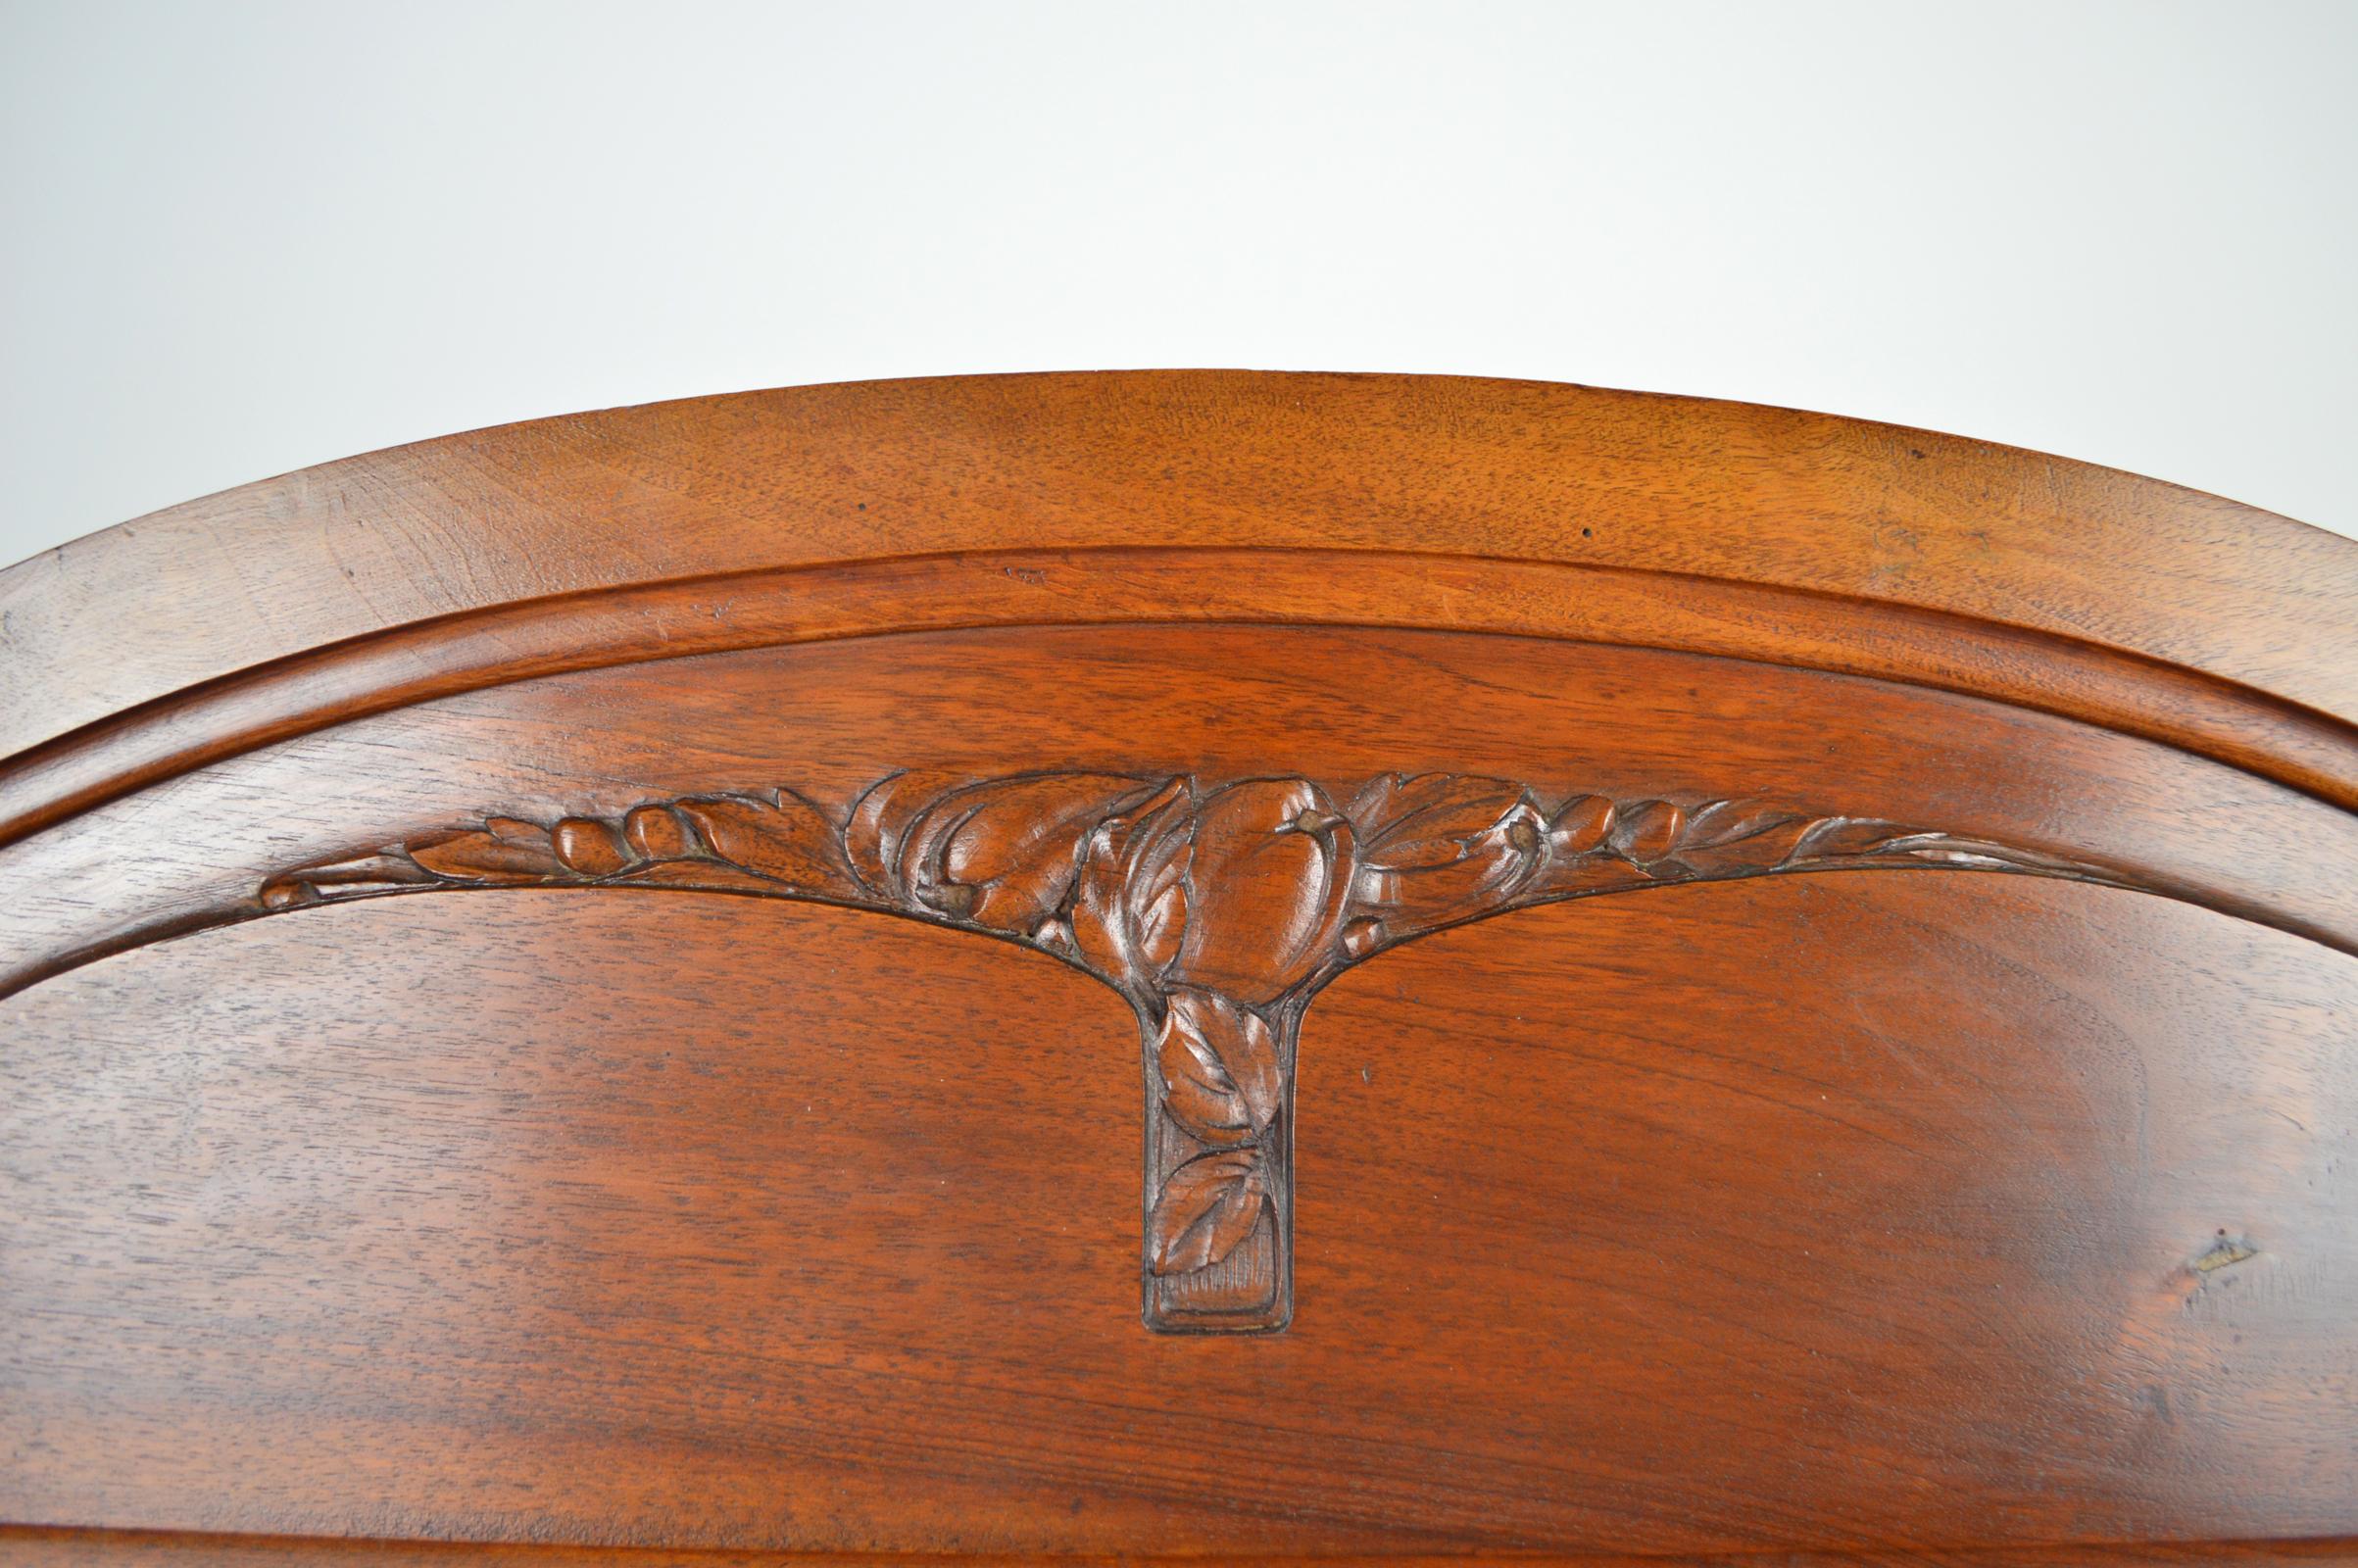 Early 20th Century French Art Nouveau Fireplace Mantel Mirror, Carved Walnut on a Fruit Theme, 1910 For Sale